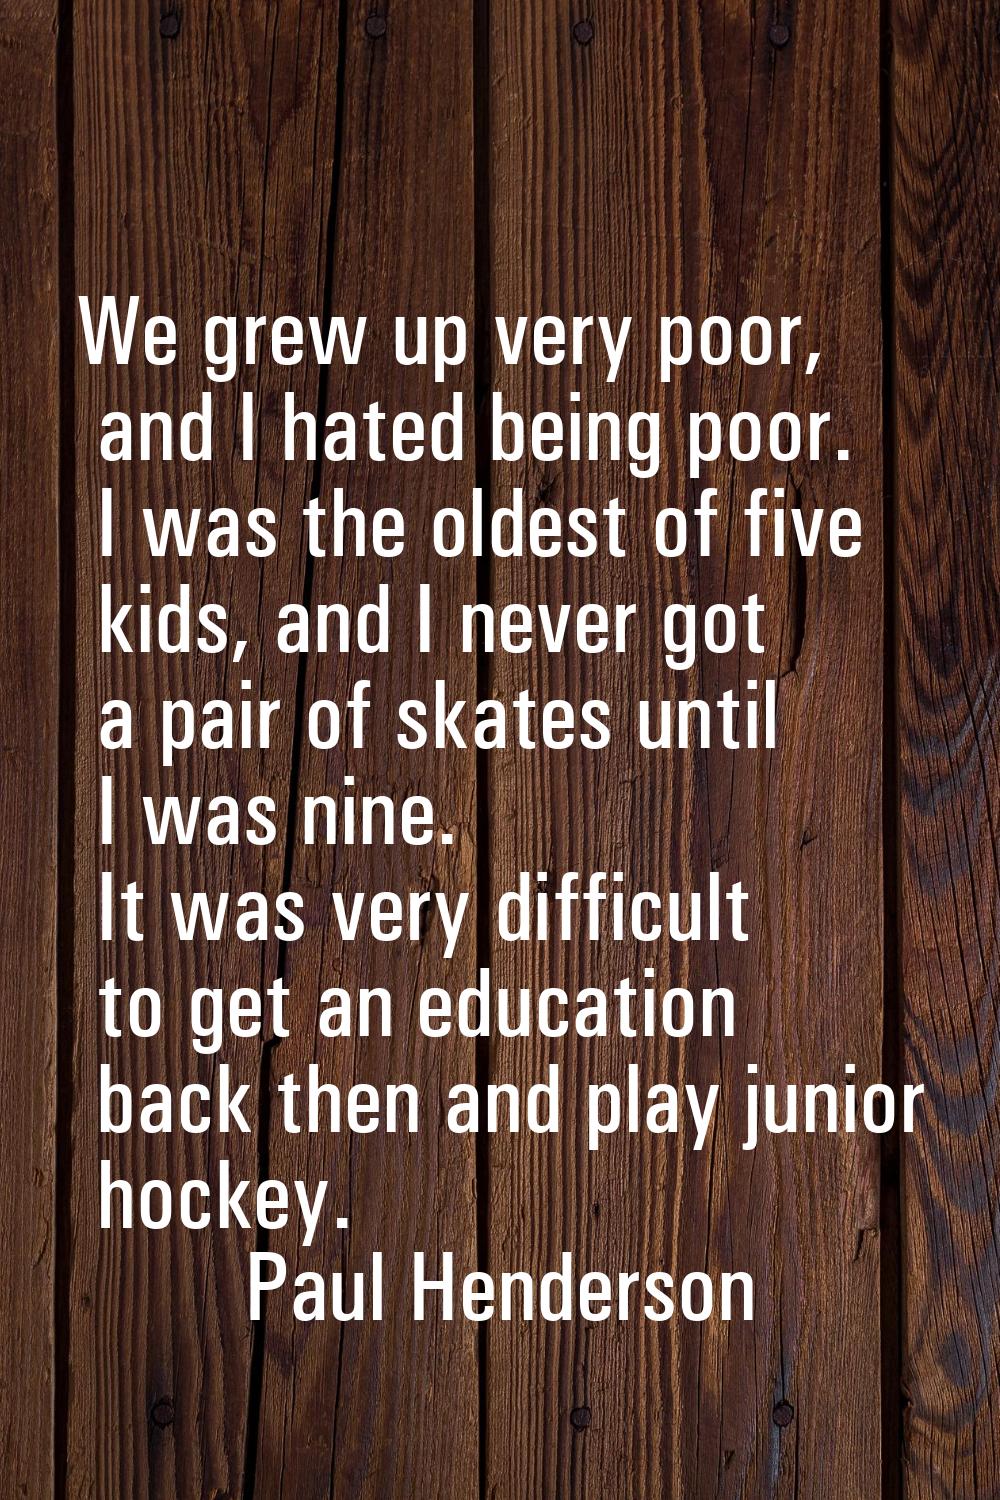 We grew up very poor, and I hated being poor. I was the oldest of five kids, and I never got a pair